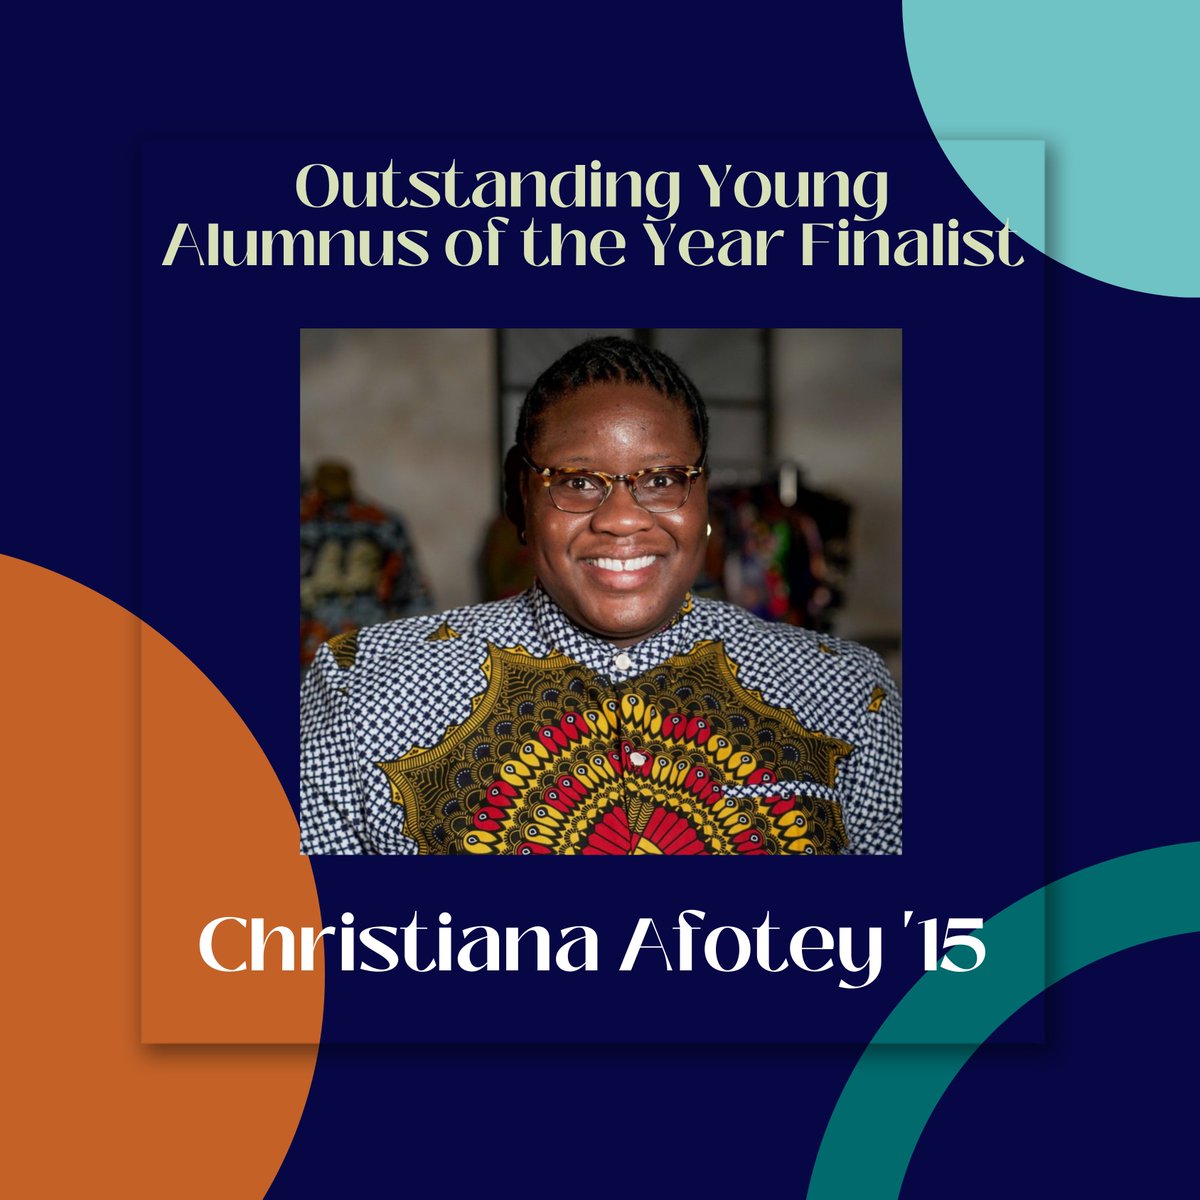 Christiana Afotey graduated in 2015 from Nashville State Community College with an Associate’s in Business Administration. She is the Founder and CEO of Threads by Dreads. Christiana is a visionary sustainable fashion designer.

Find out more on Oct 24th - event.gives/falconawards